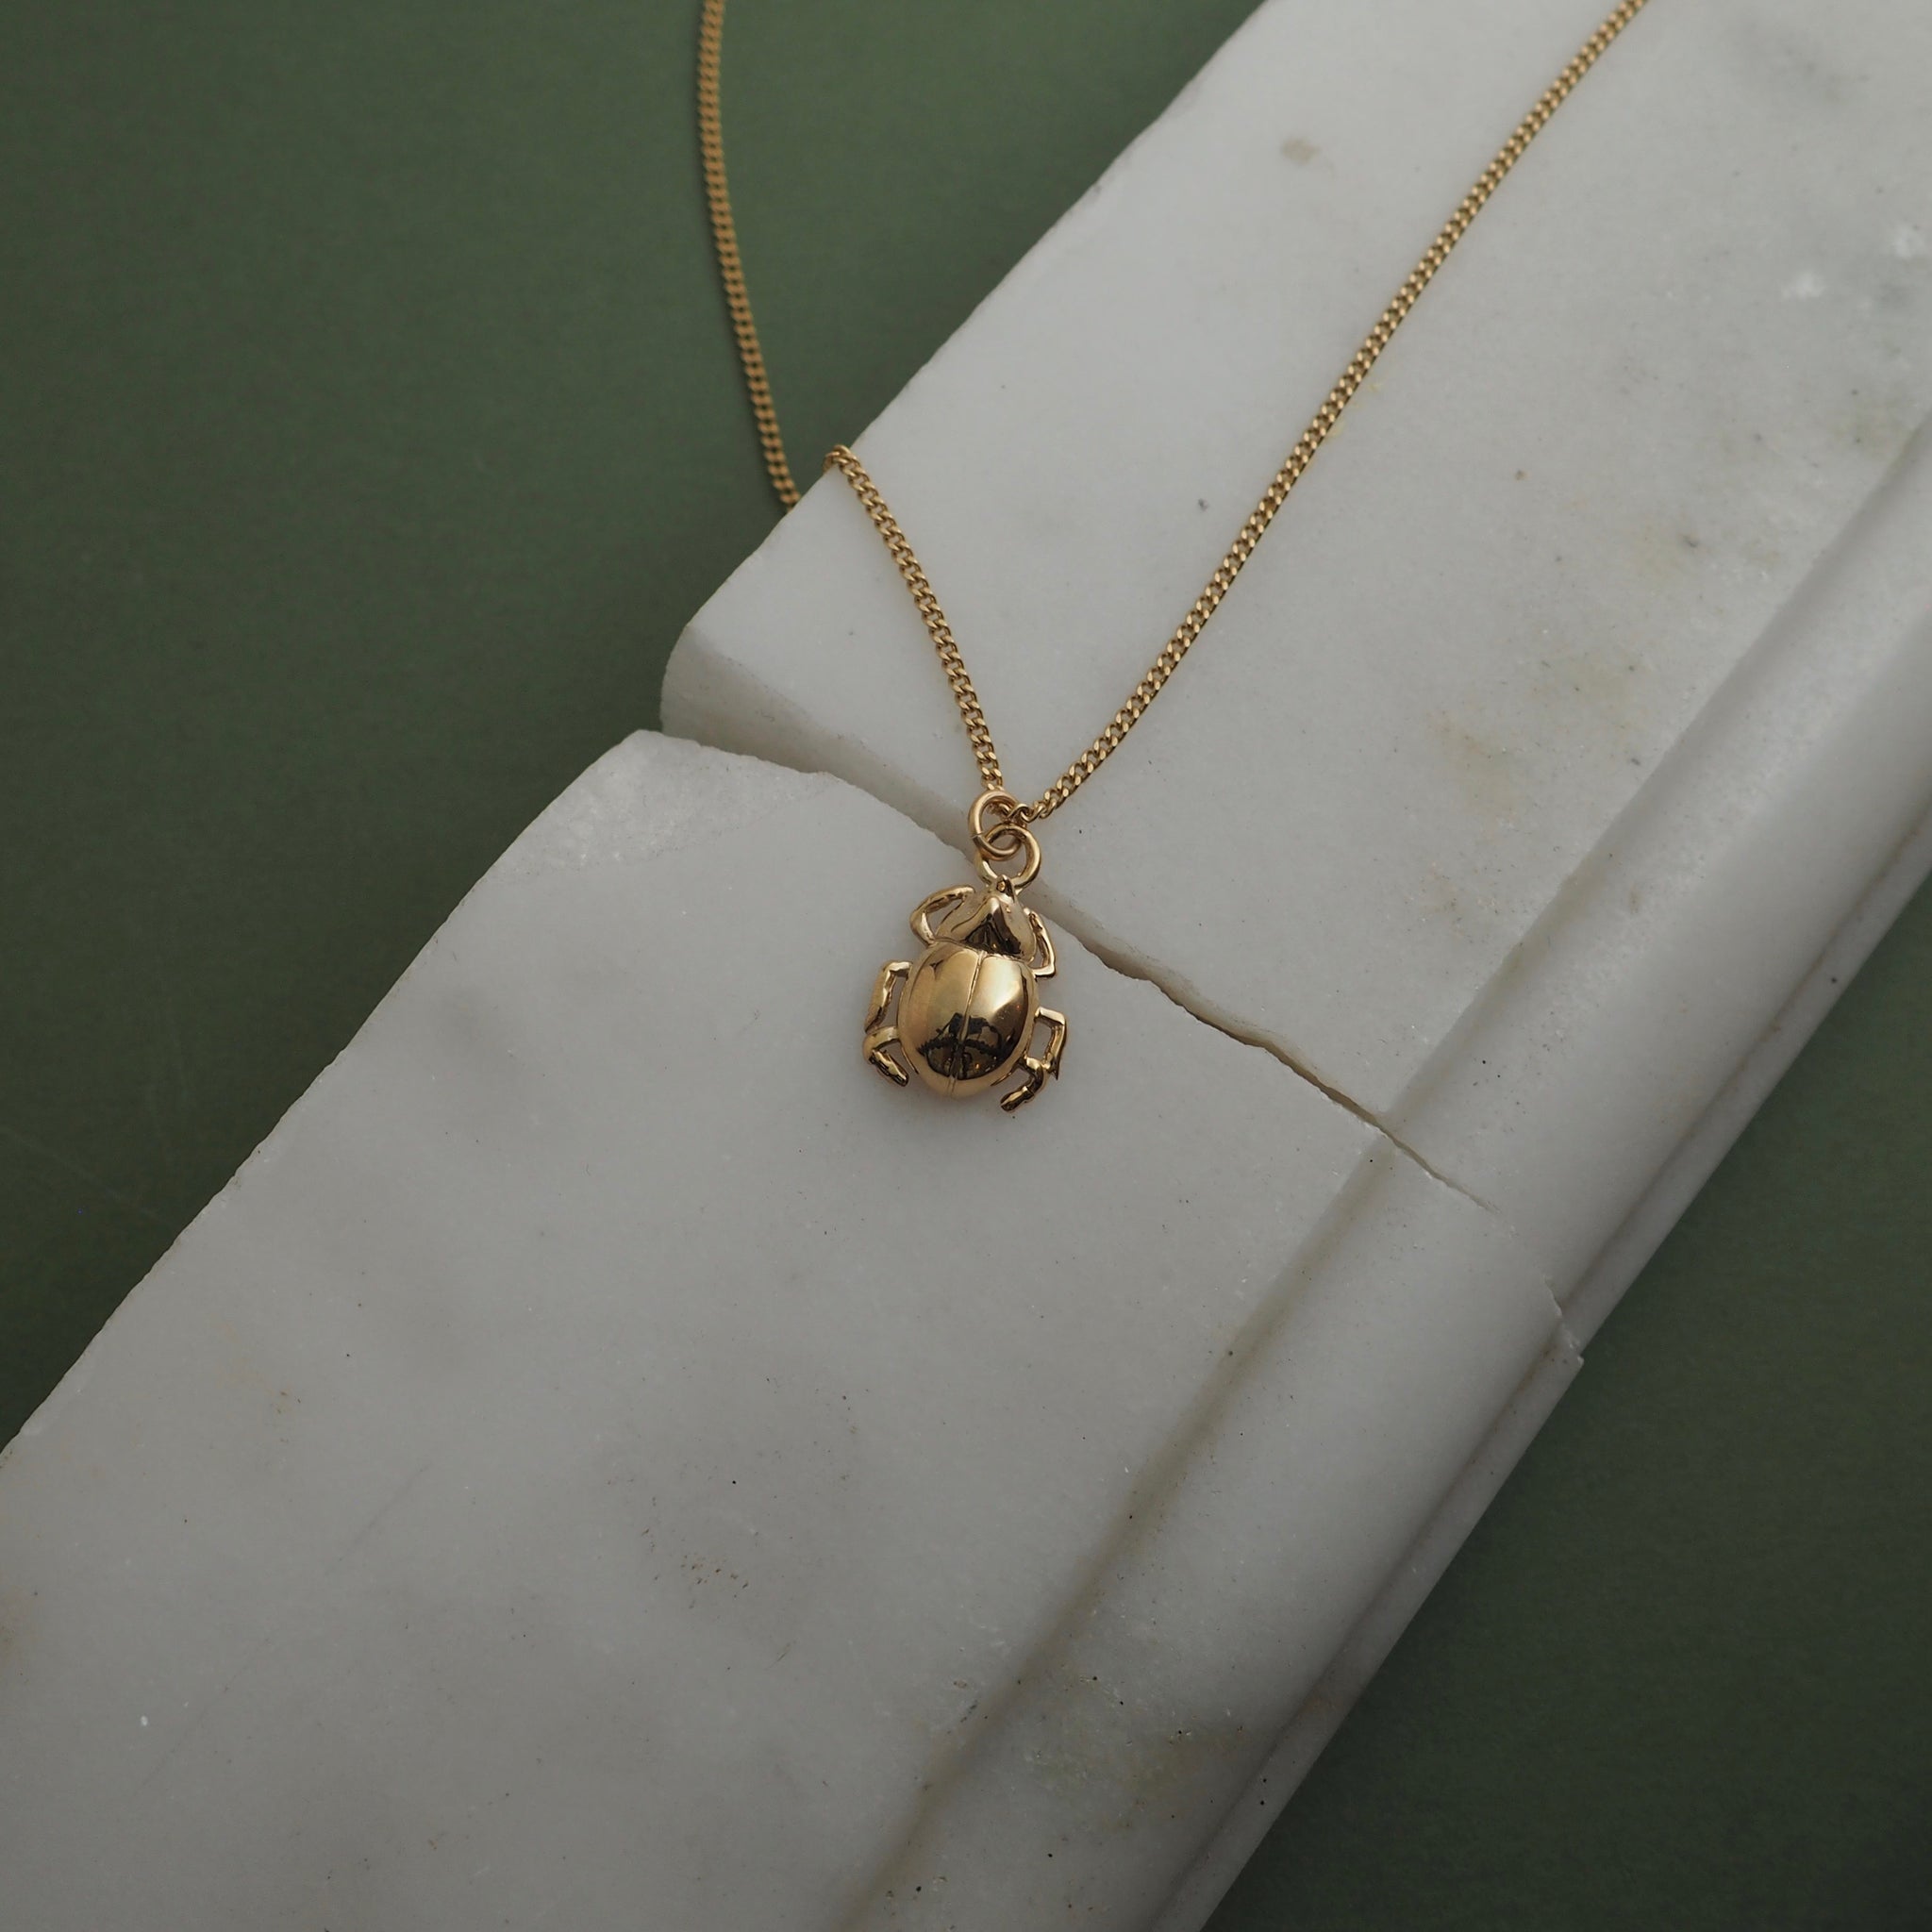 9ct Gold Little Rhino Beetle Necklace by Yasmin Everley